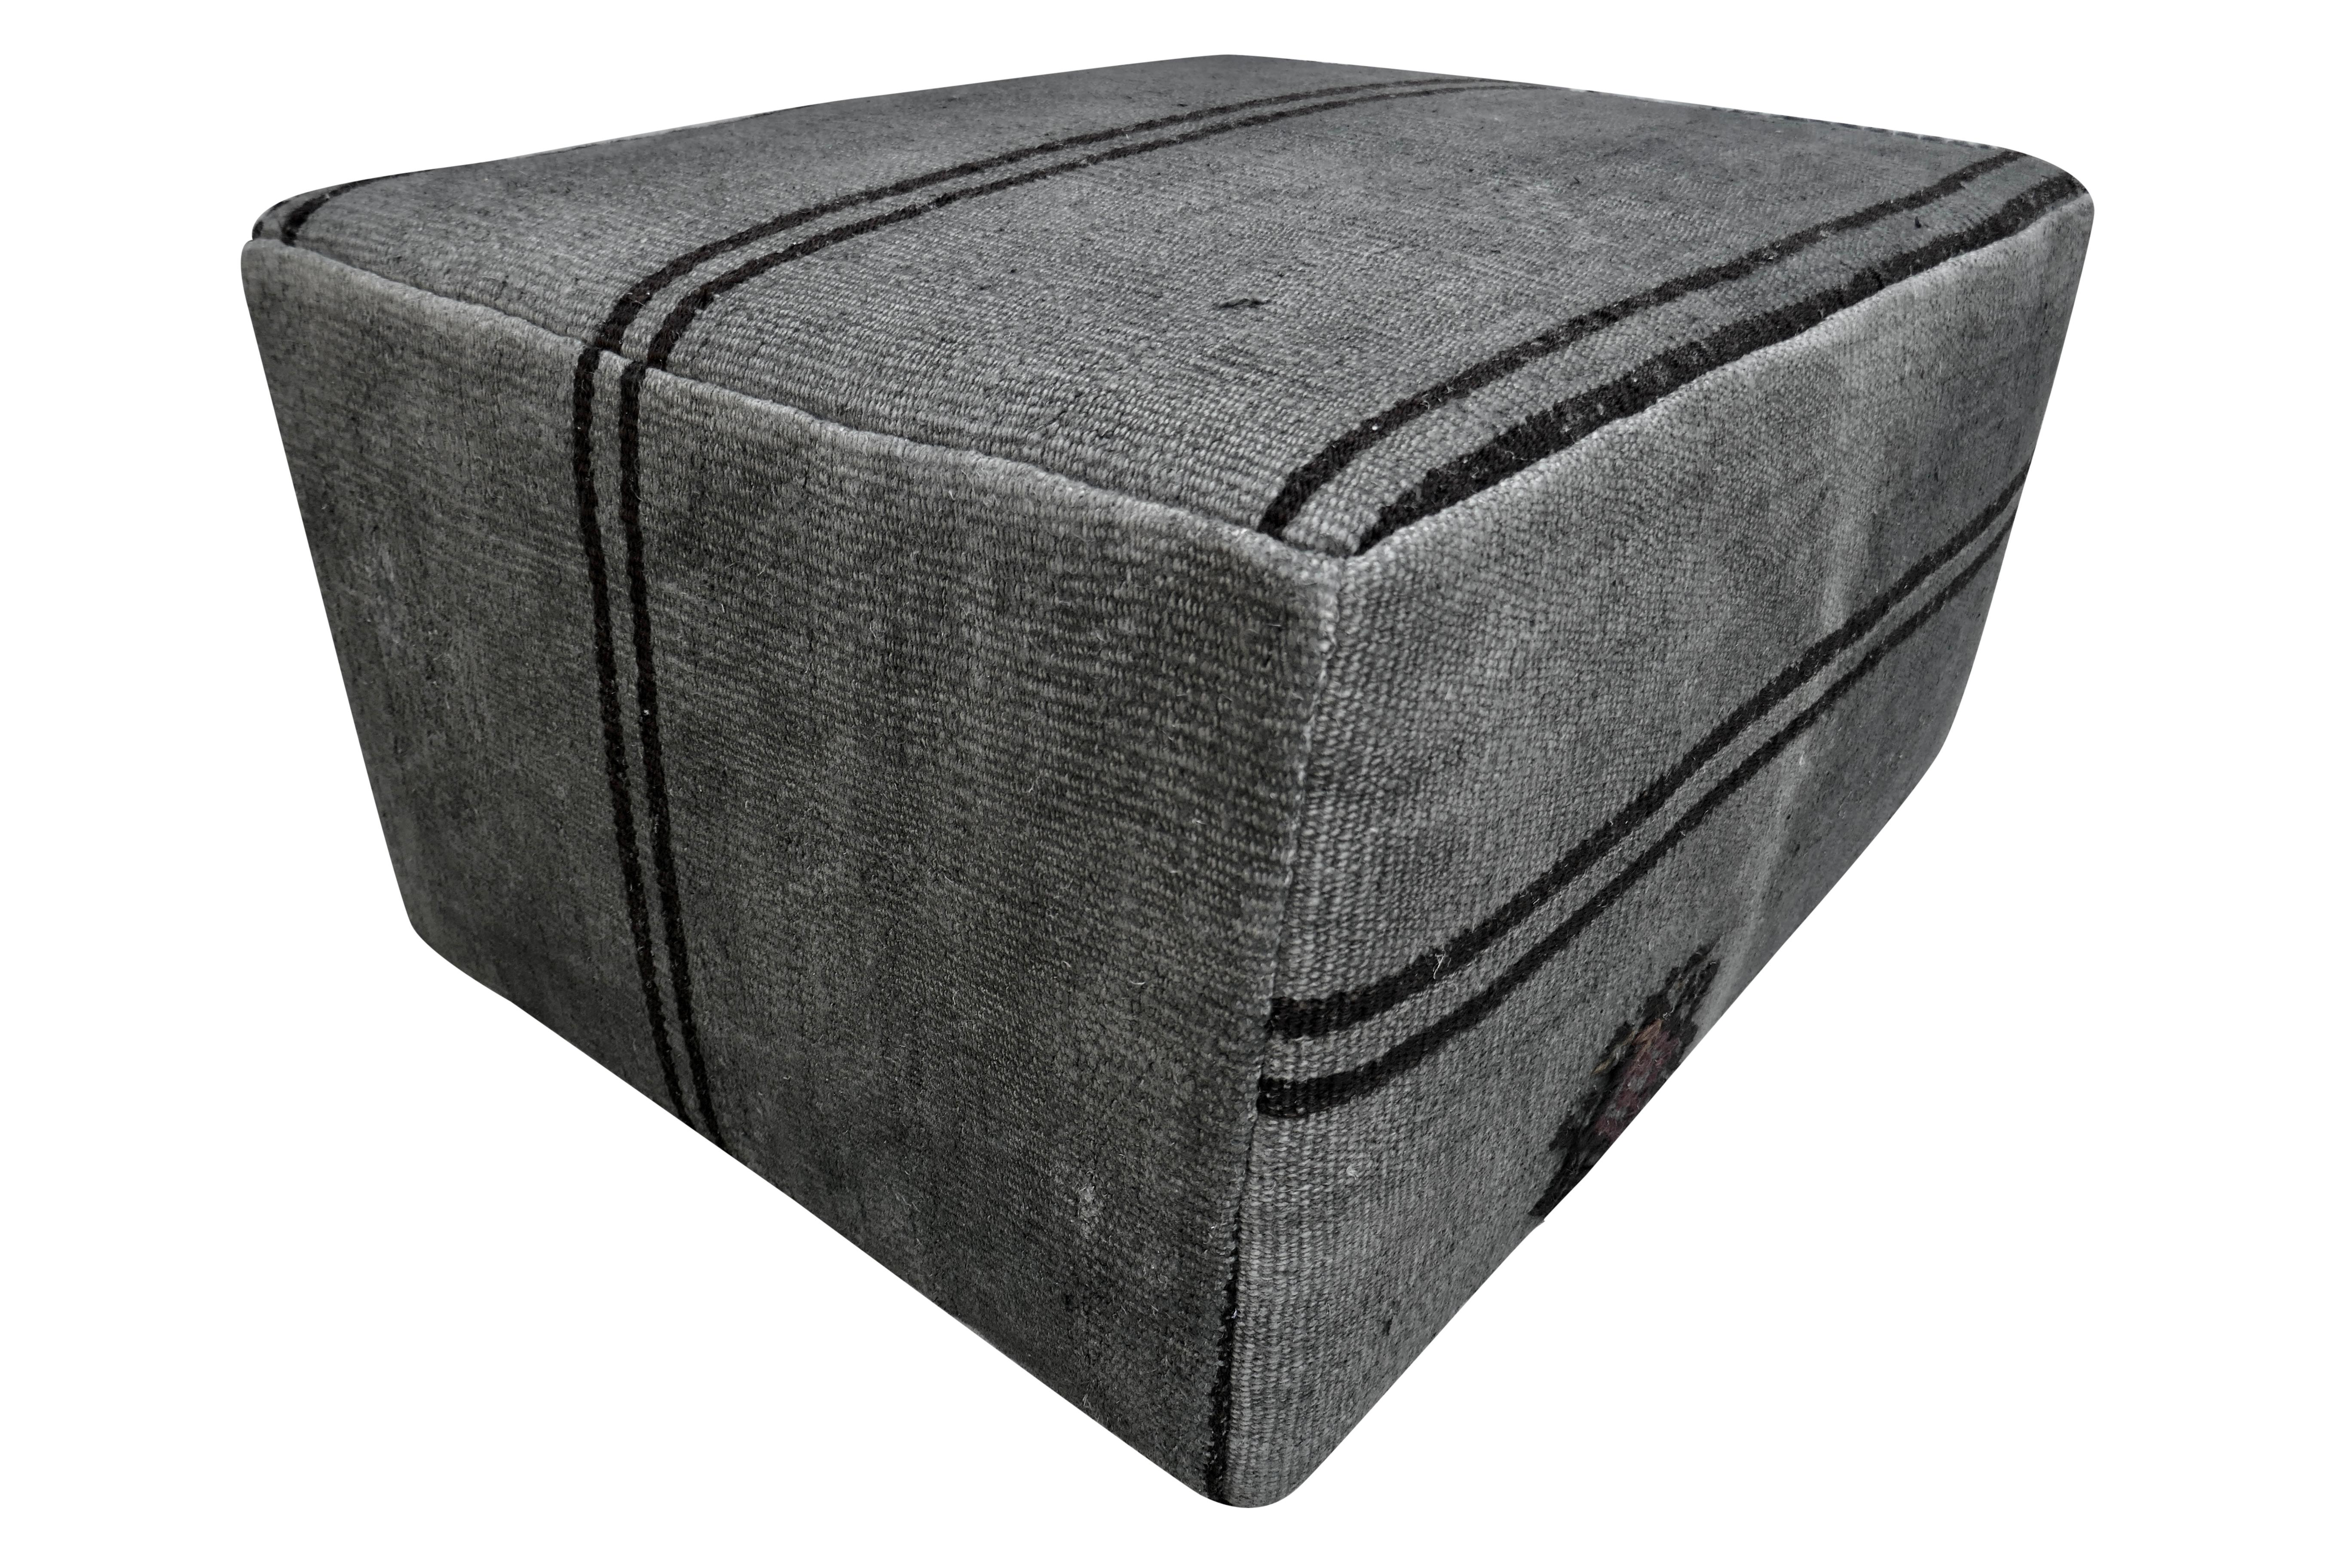 FI custom ottoman in authentic vintage Berber Tribal Kilim wool. Created from our collection of authentic select one-of-a-kind global textiles. Featuring much desirable natural age and primitive weaving of all organic natural fiber character